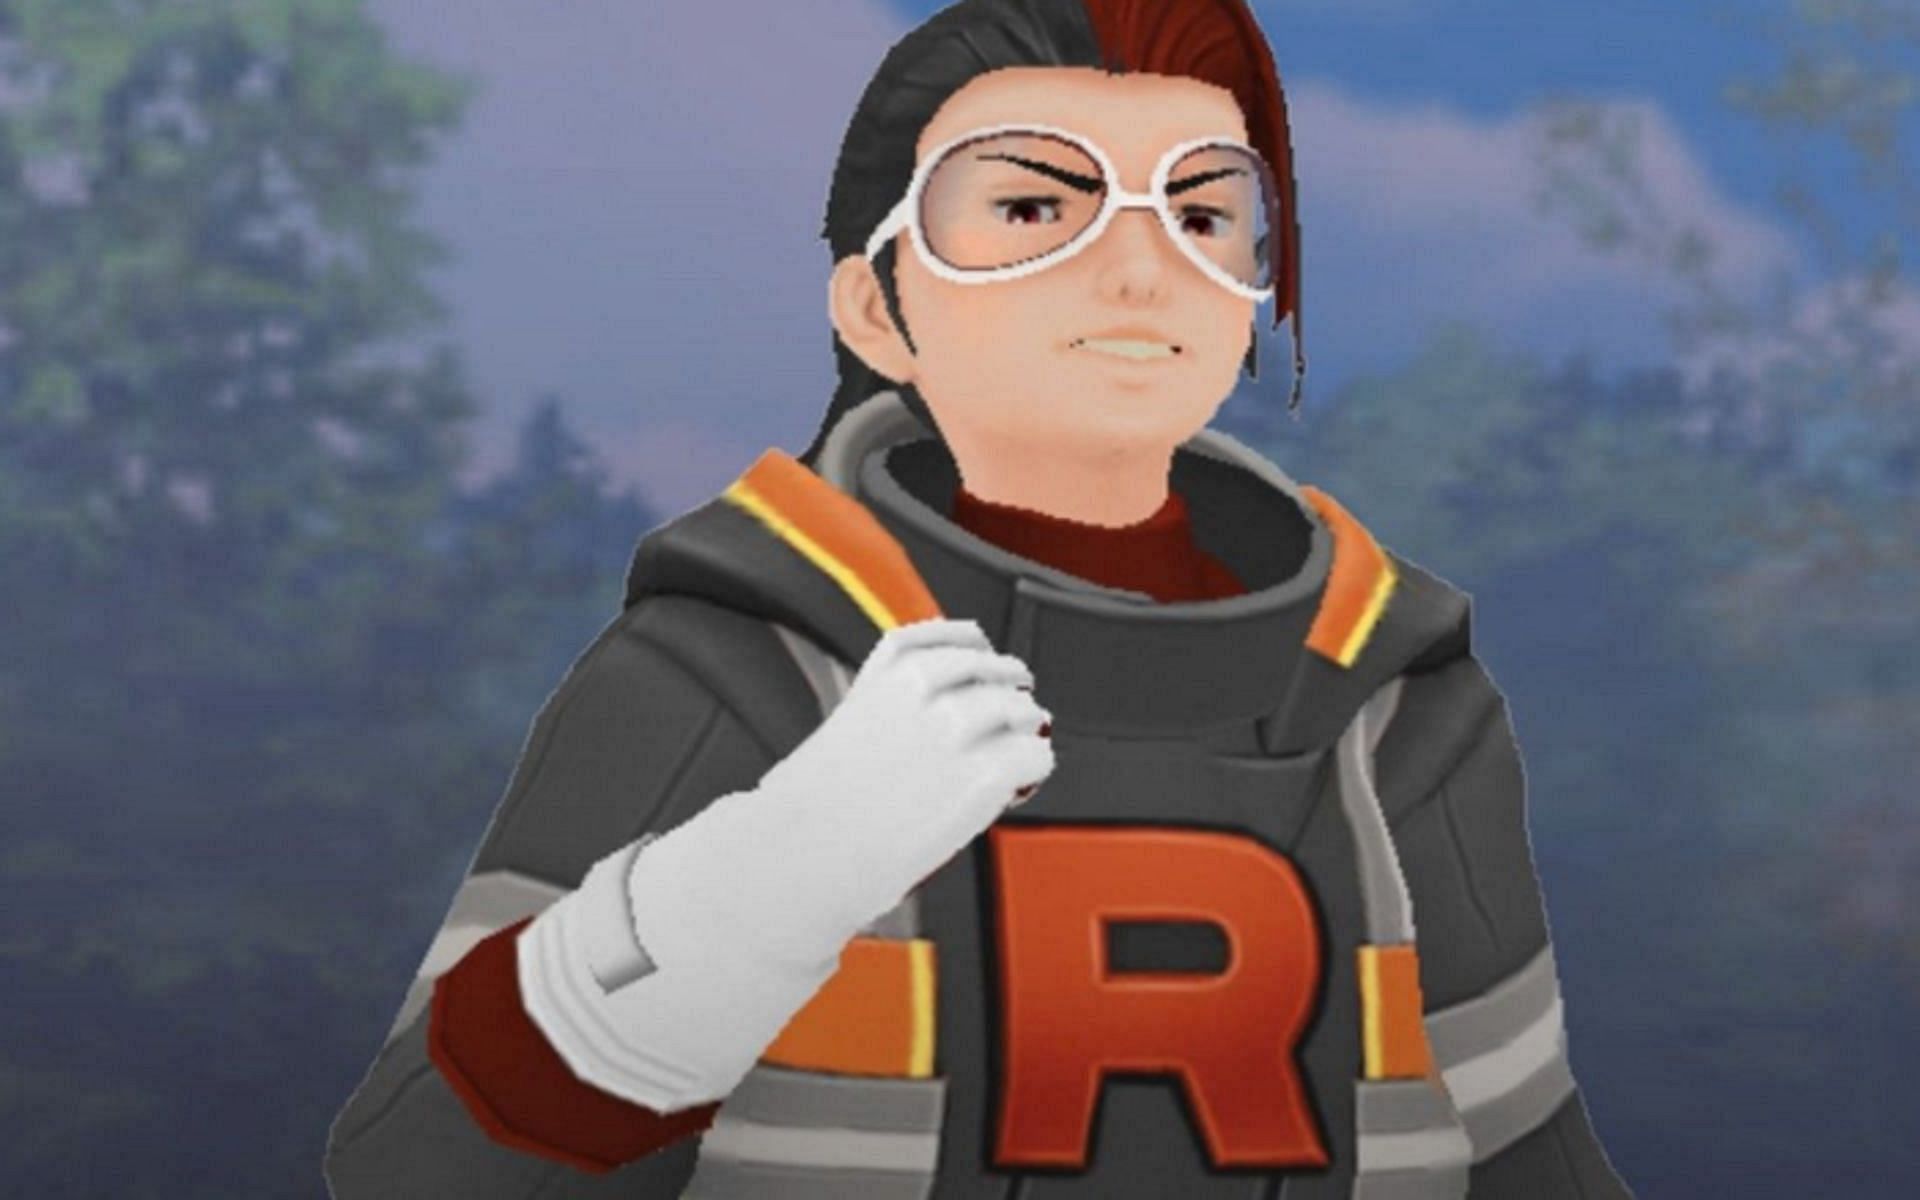 I'm lucky friends with Arlo from Team Go Rocket! - pokemon go post